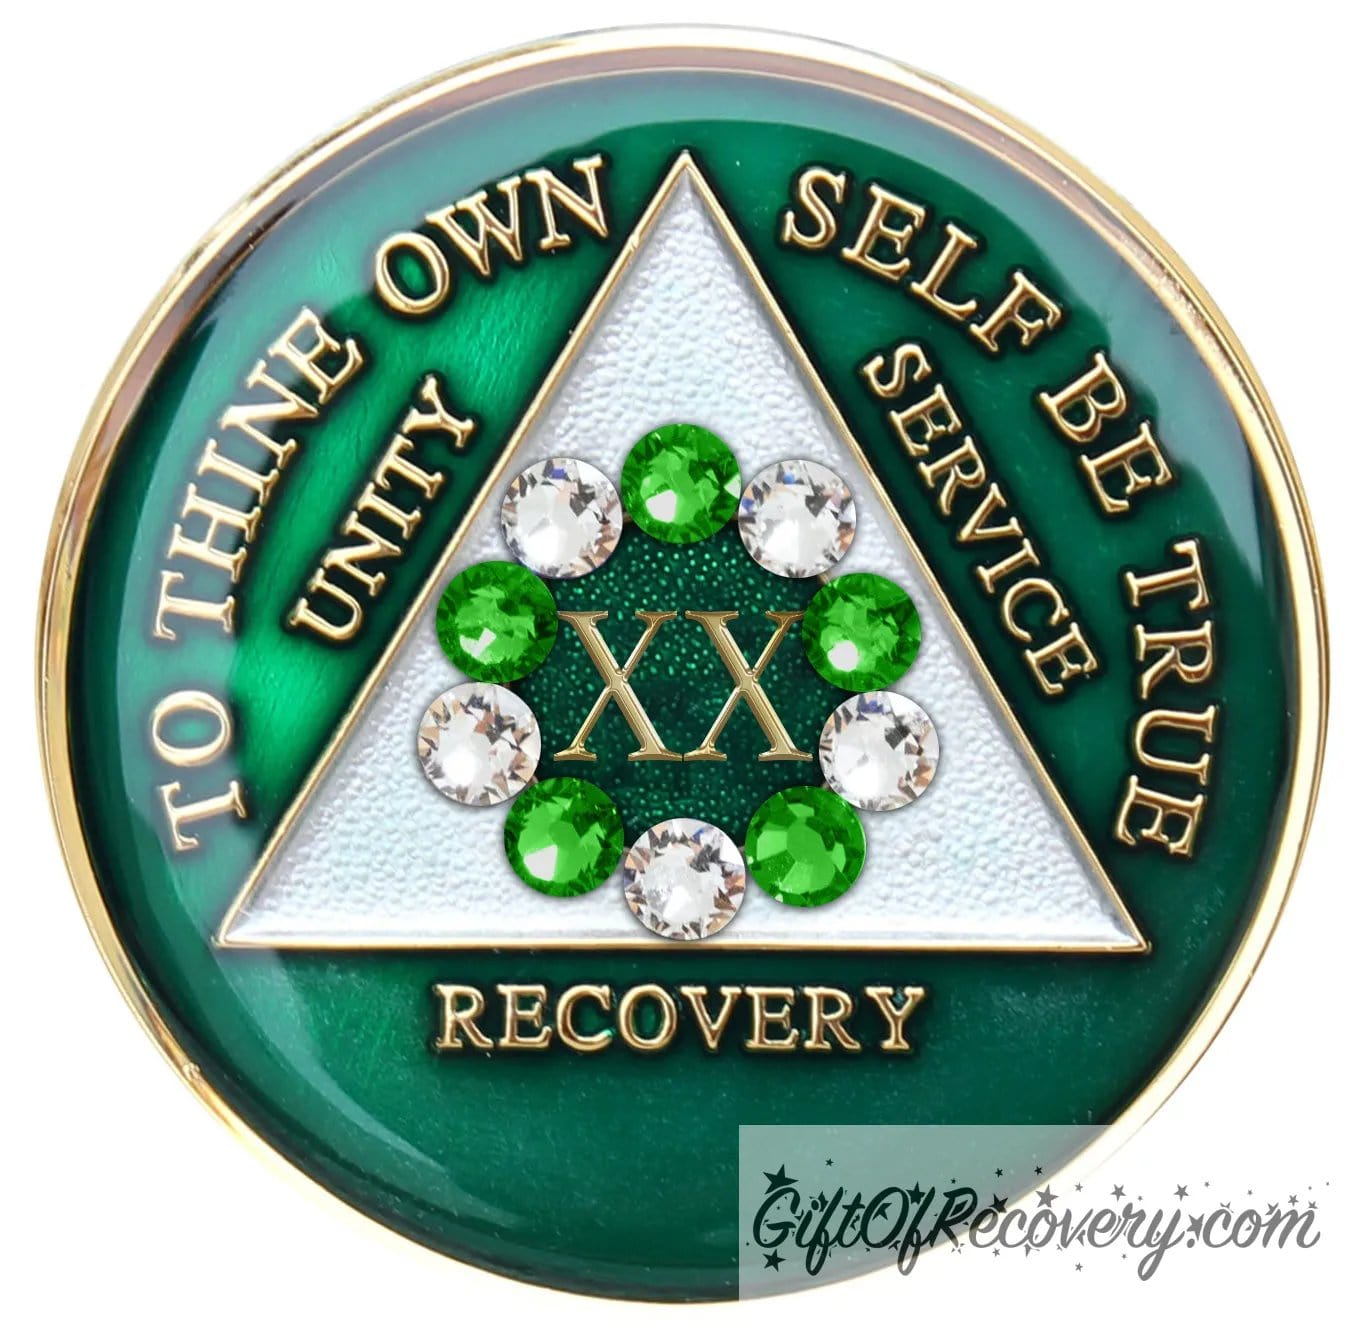 20 year emerald green AA medallion with the 10th step in emphasis in the center, 5 emerald green genuine crystals and 5 clear genuine crystals, inside the triangle is pearl white, while the circle is sparkle green. To thine own self be true, unity, service, recovery, and the roman numeral 1, are 14k gold and sealed with resin for a glossy finish.